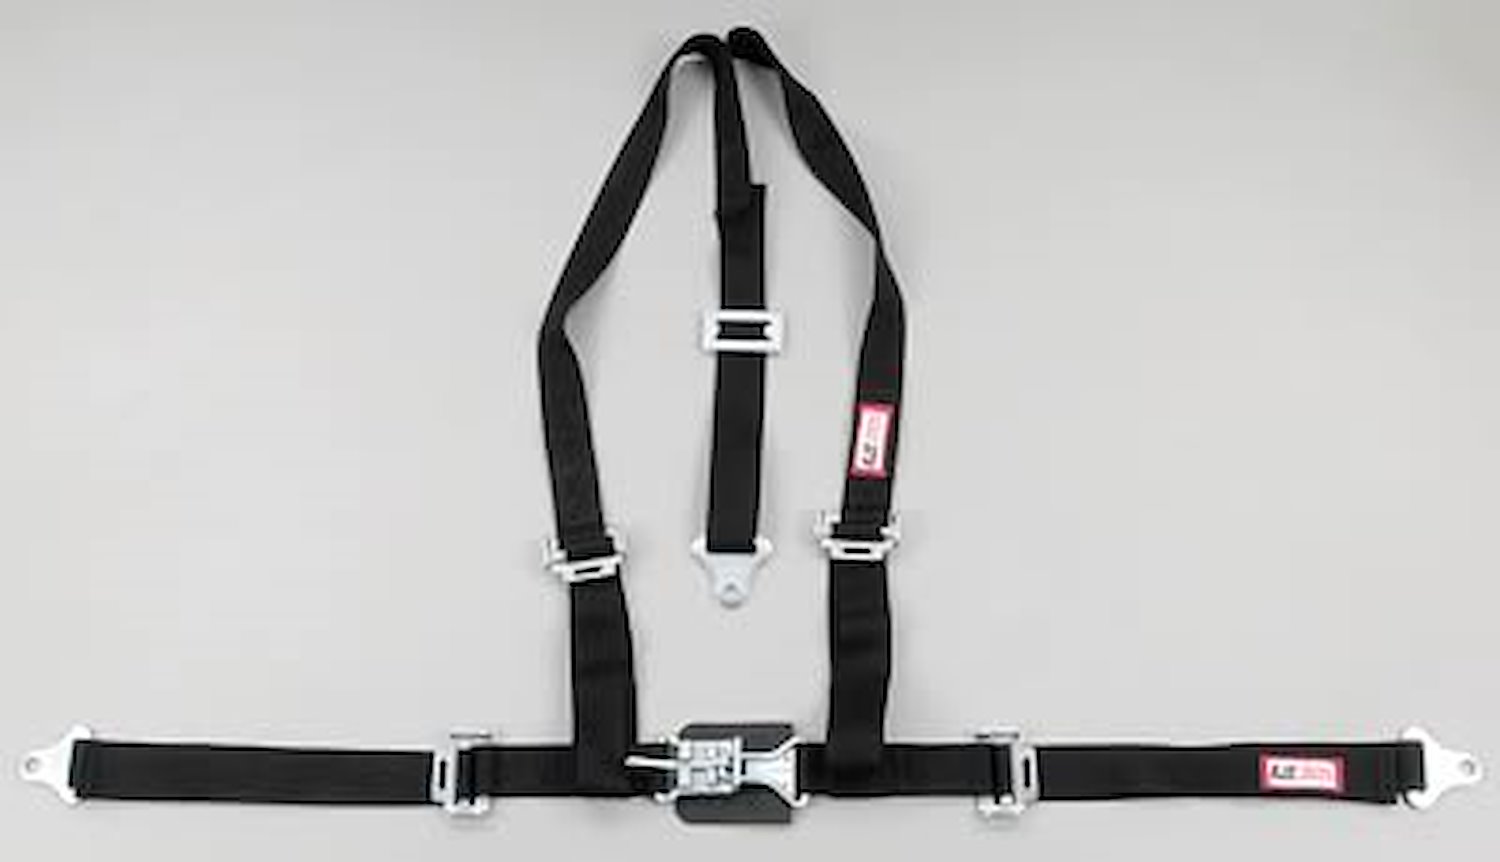 NON-SFI L&L HARNESS 2 PULL UP Lap Belt SEWN IN 2 S.H. Y FLOOR Mount w/STERNUM STRAP ALL WRAP ENDS HOT PINK